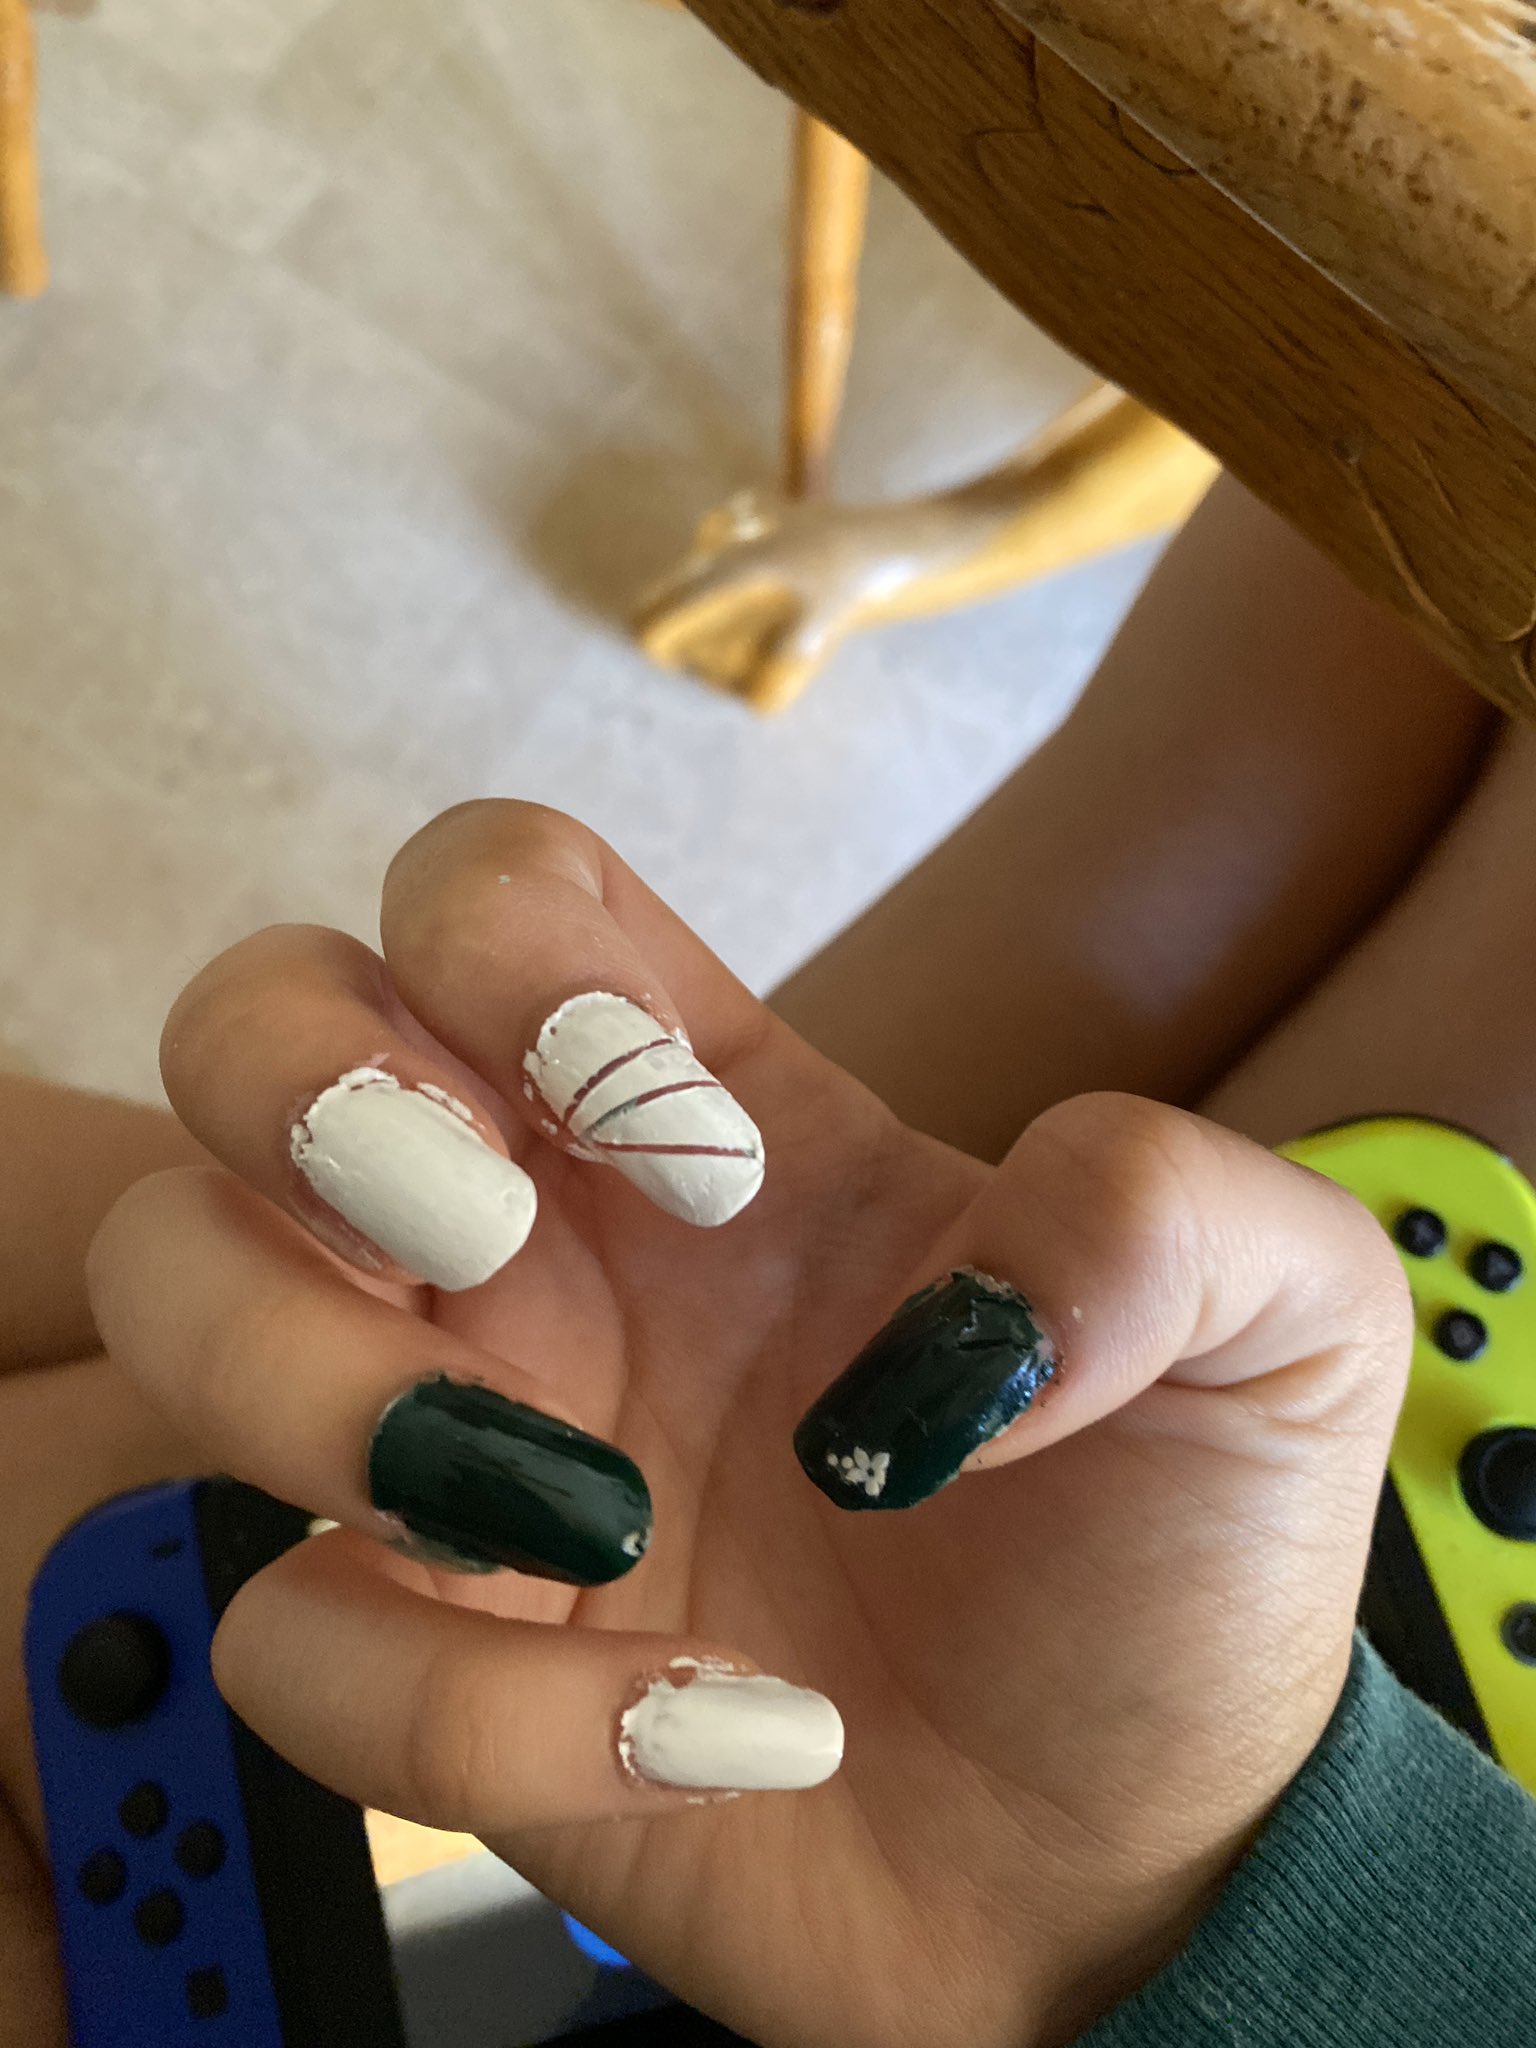 This girl has shared the reality of an acrylic nail addiction